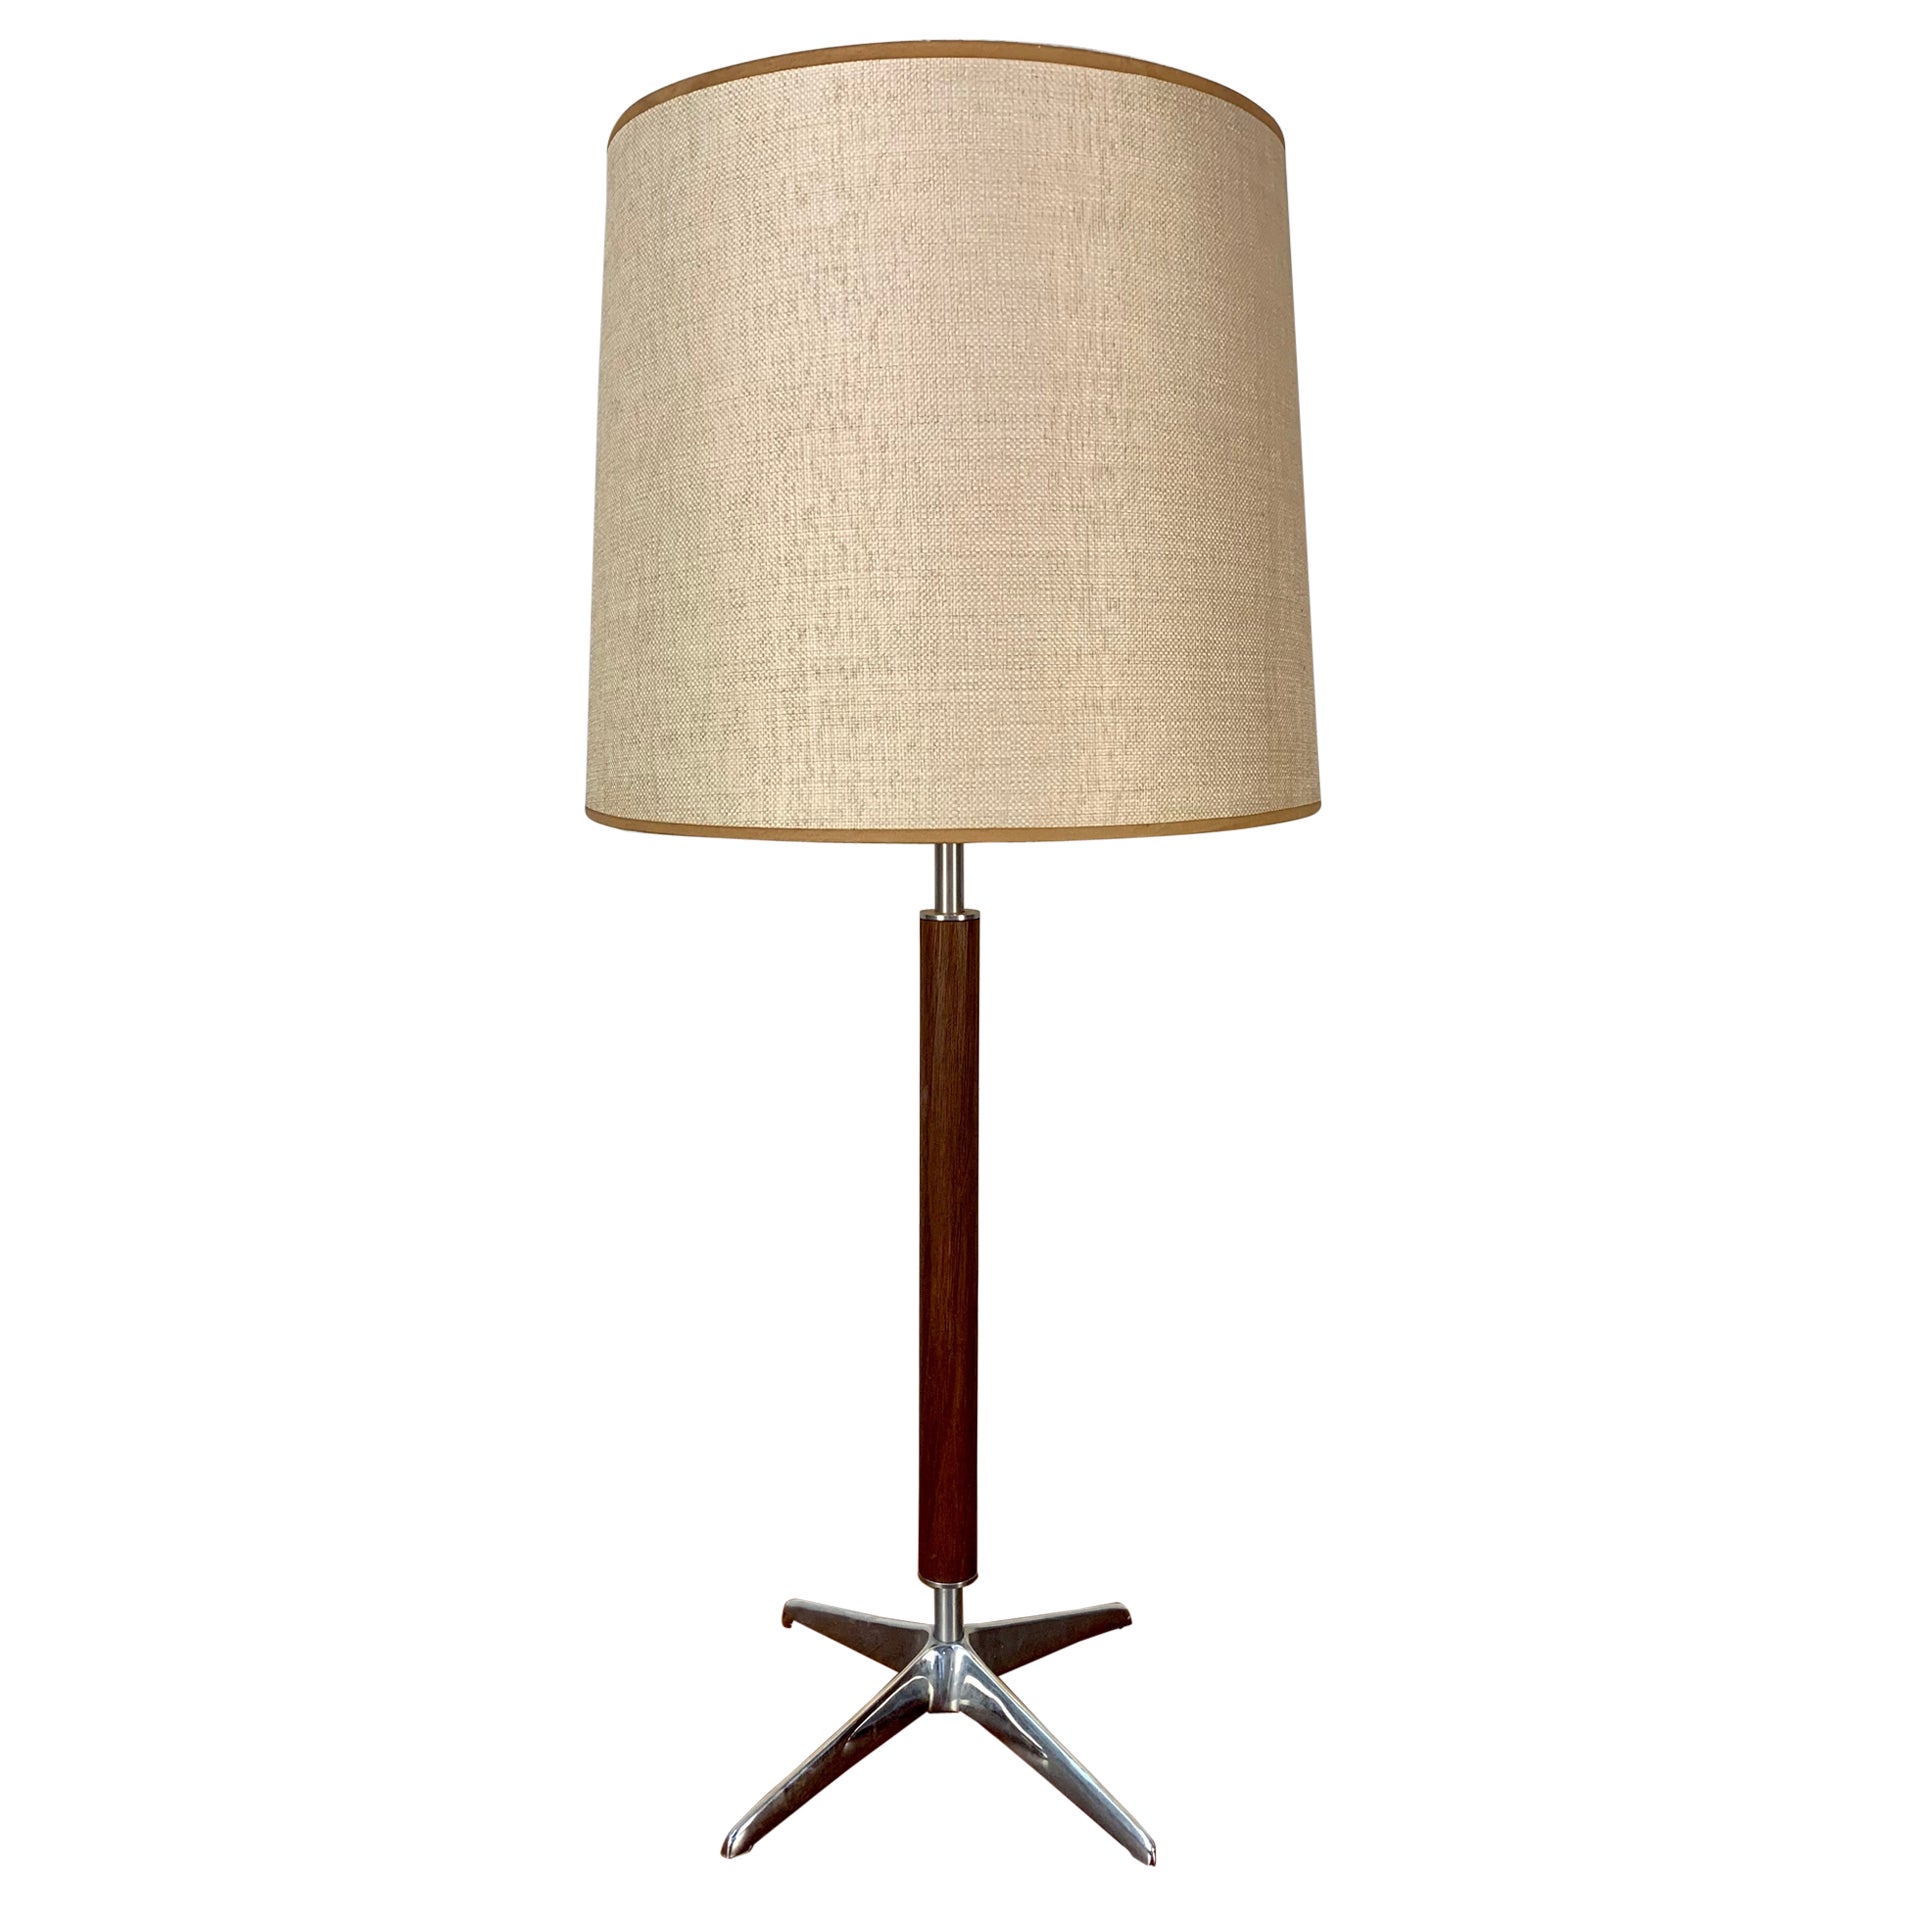 Walnut and Chrome Table Lamp by Gerald Thurston